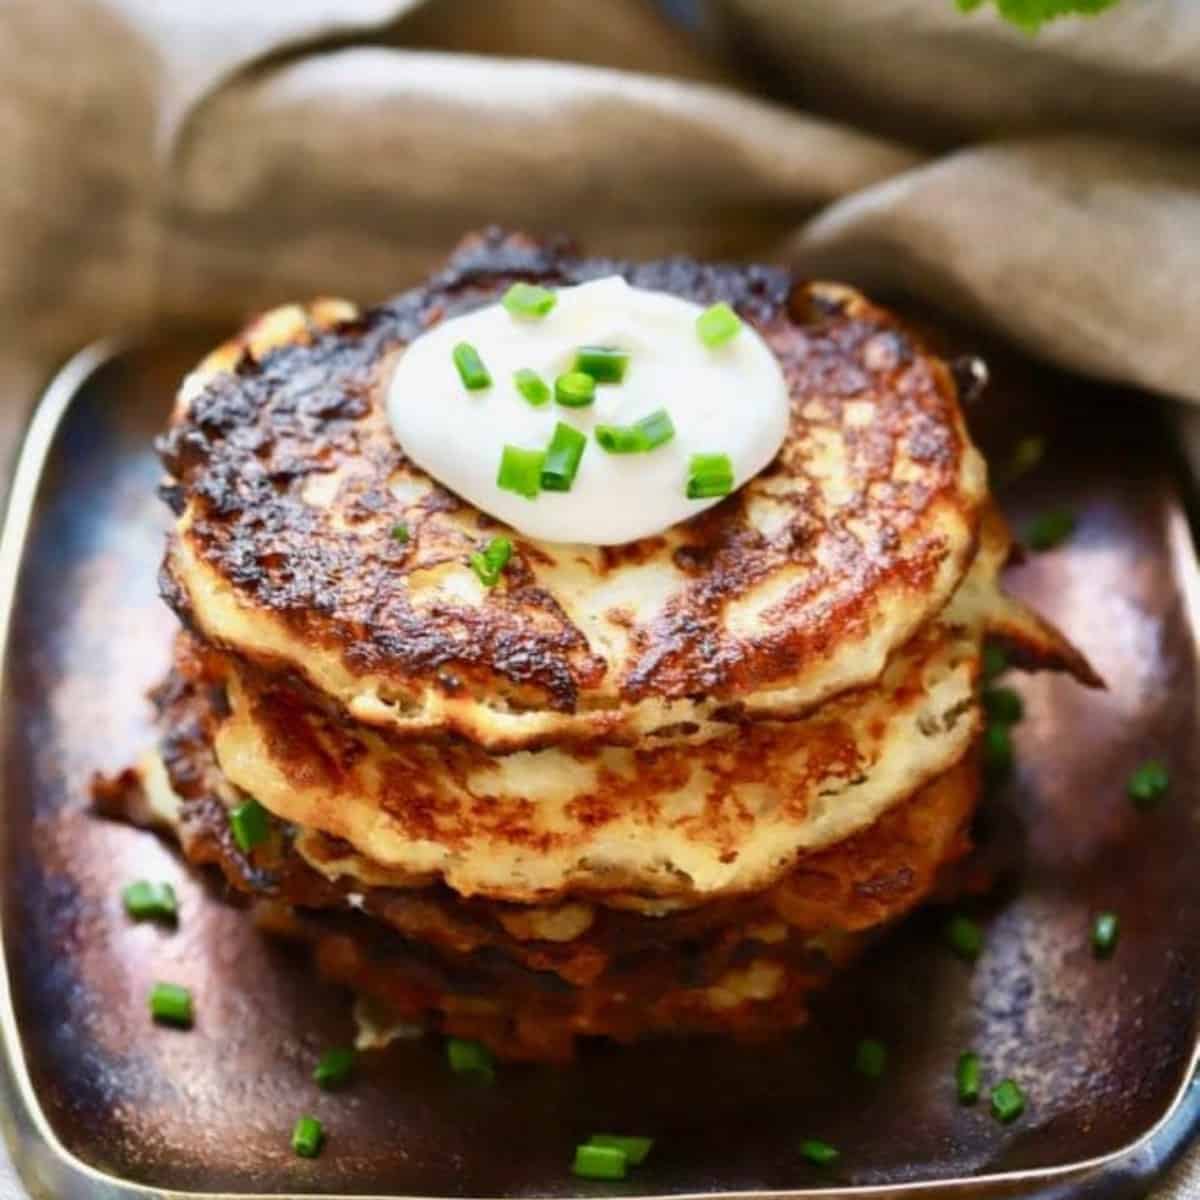 How many calories are in two potato cakes